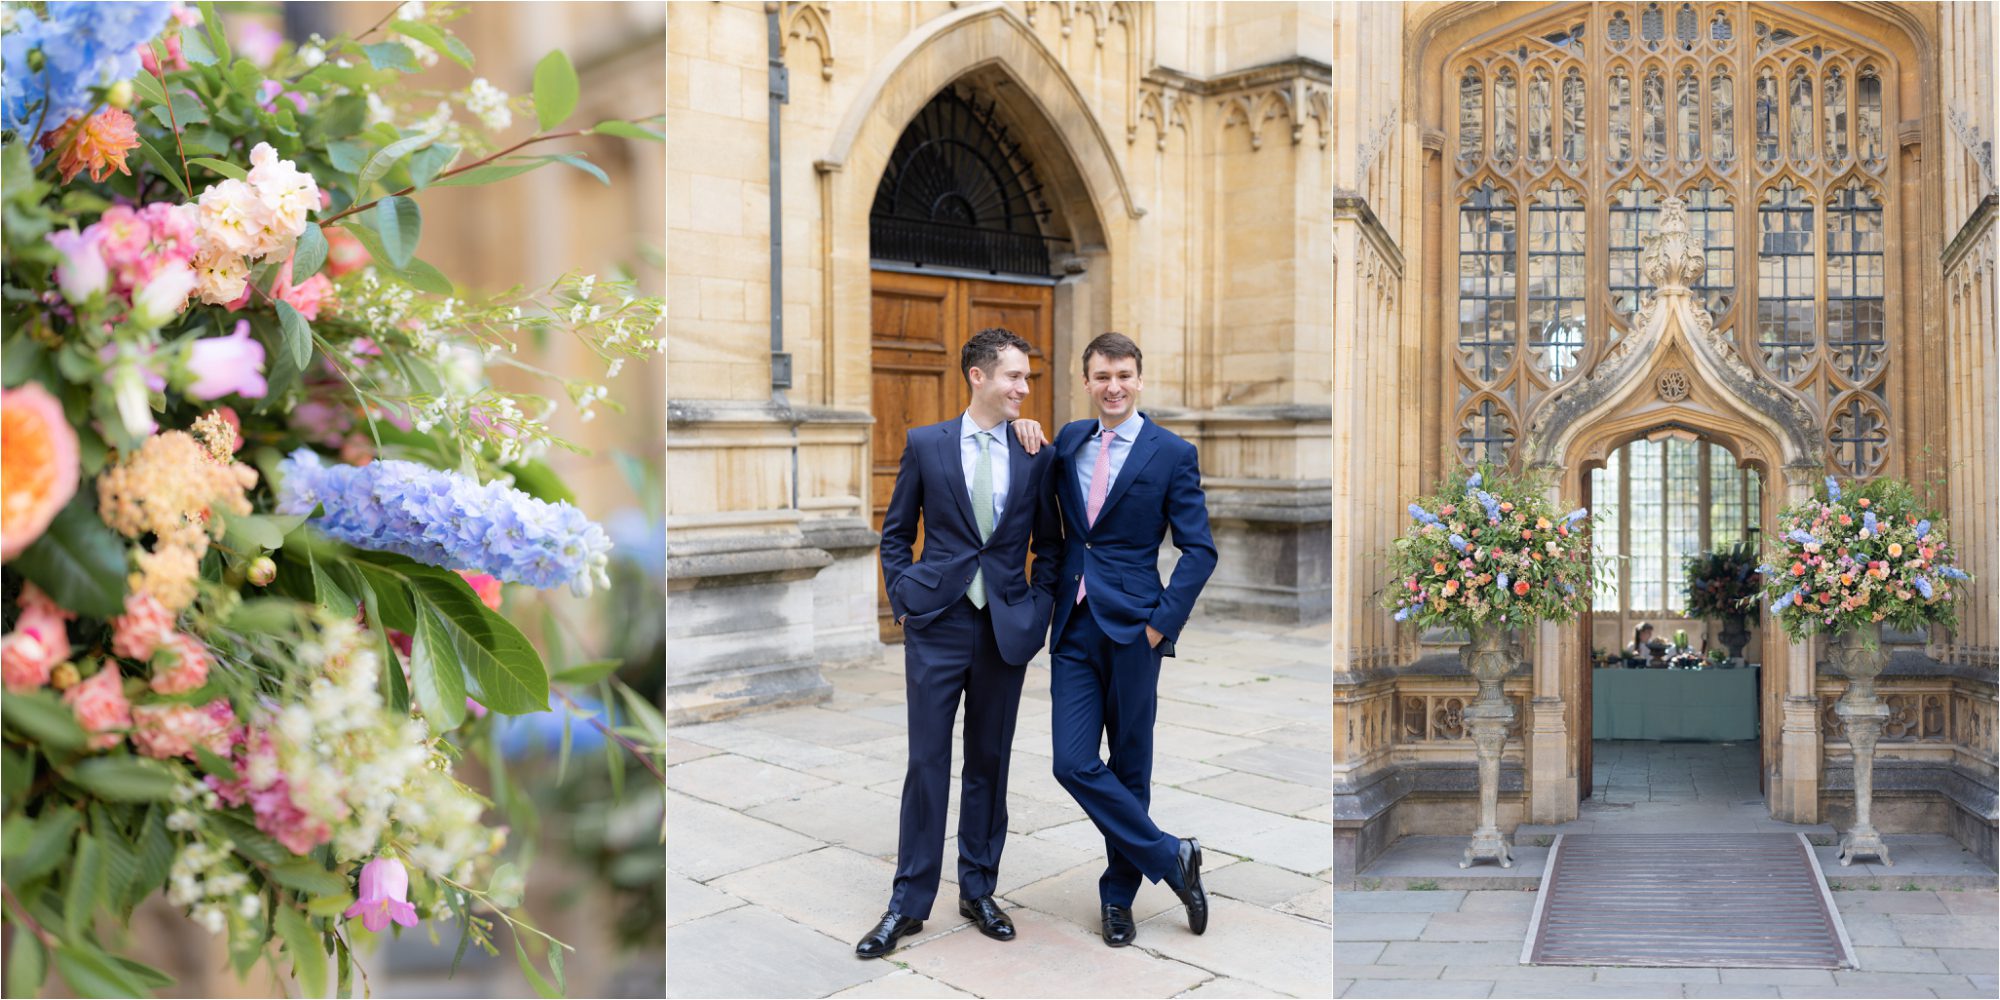 Same sex wedding at The Bodleian Library